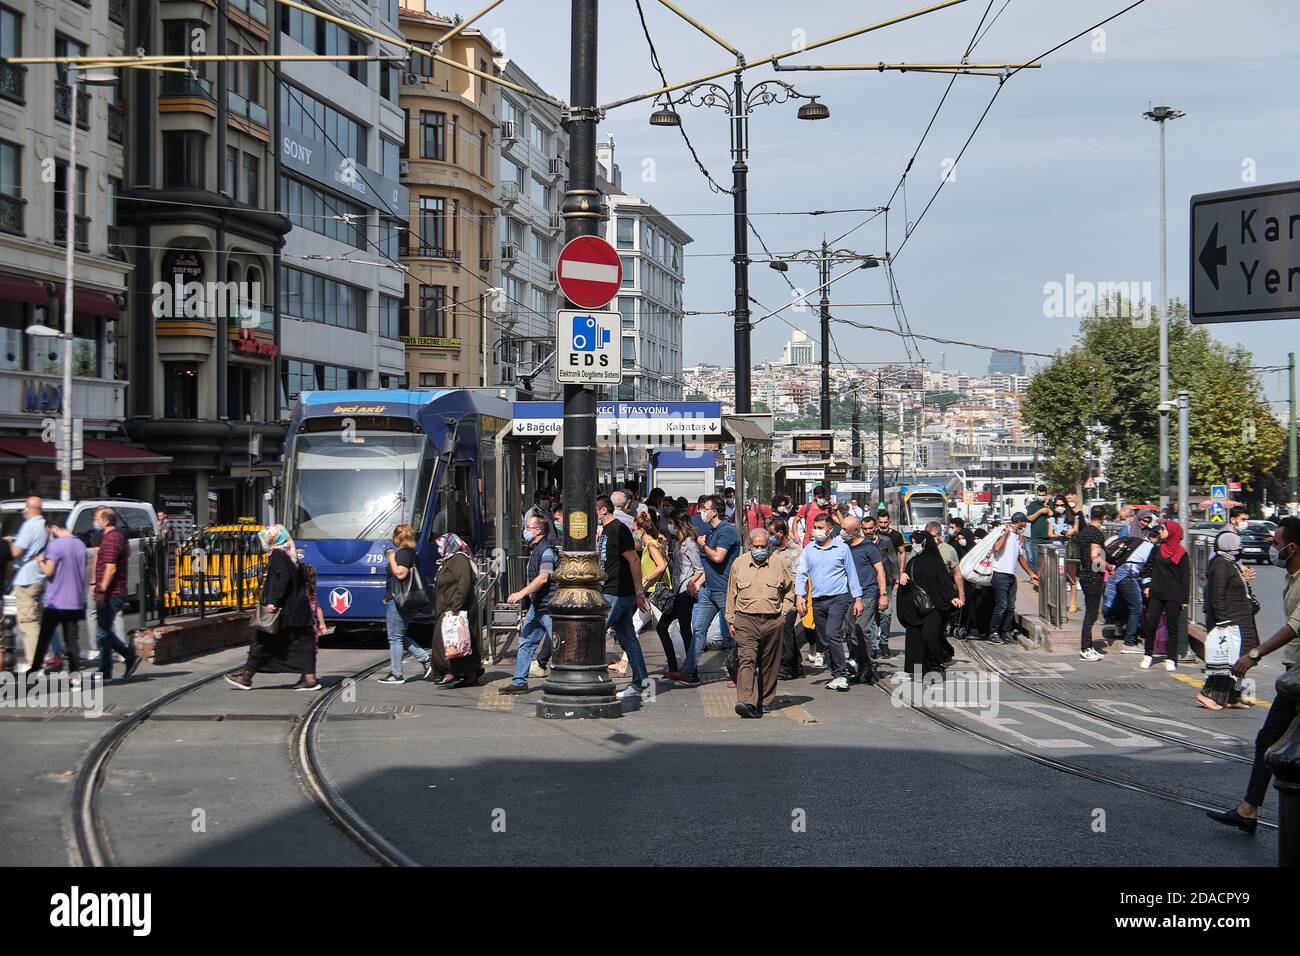 Local people in face masks crossing in front of tram at Sirkeci Istasyonu tram stop, Istanbul, Turkey Stock Photo